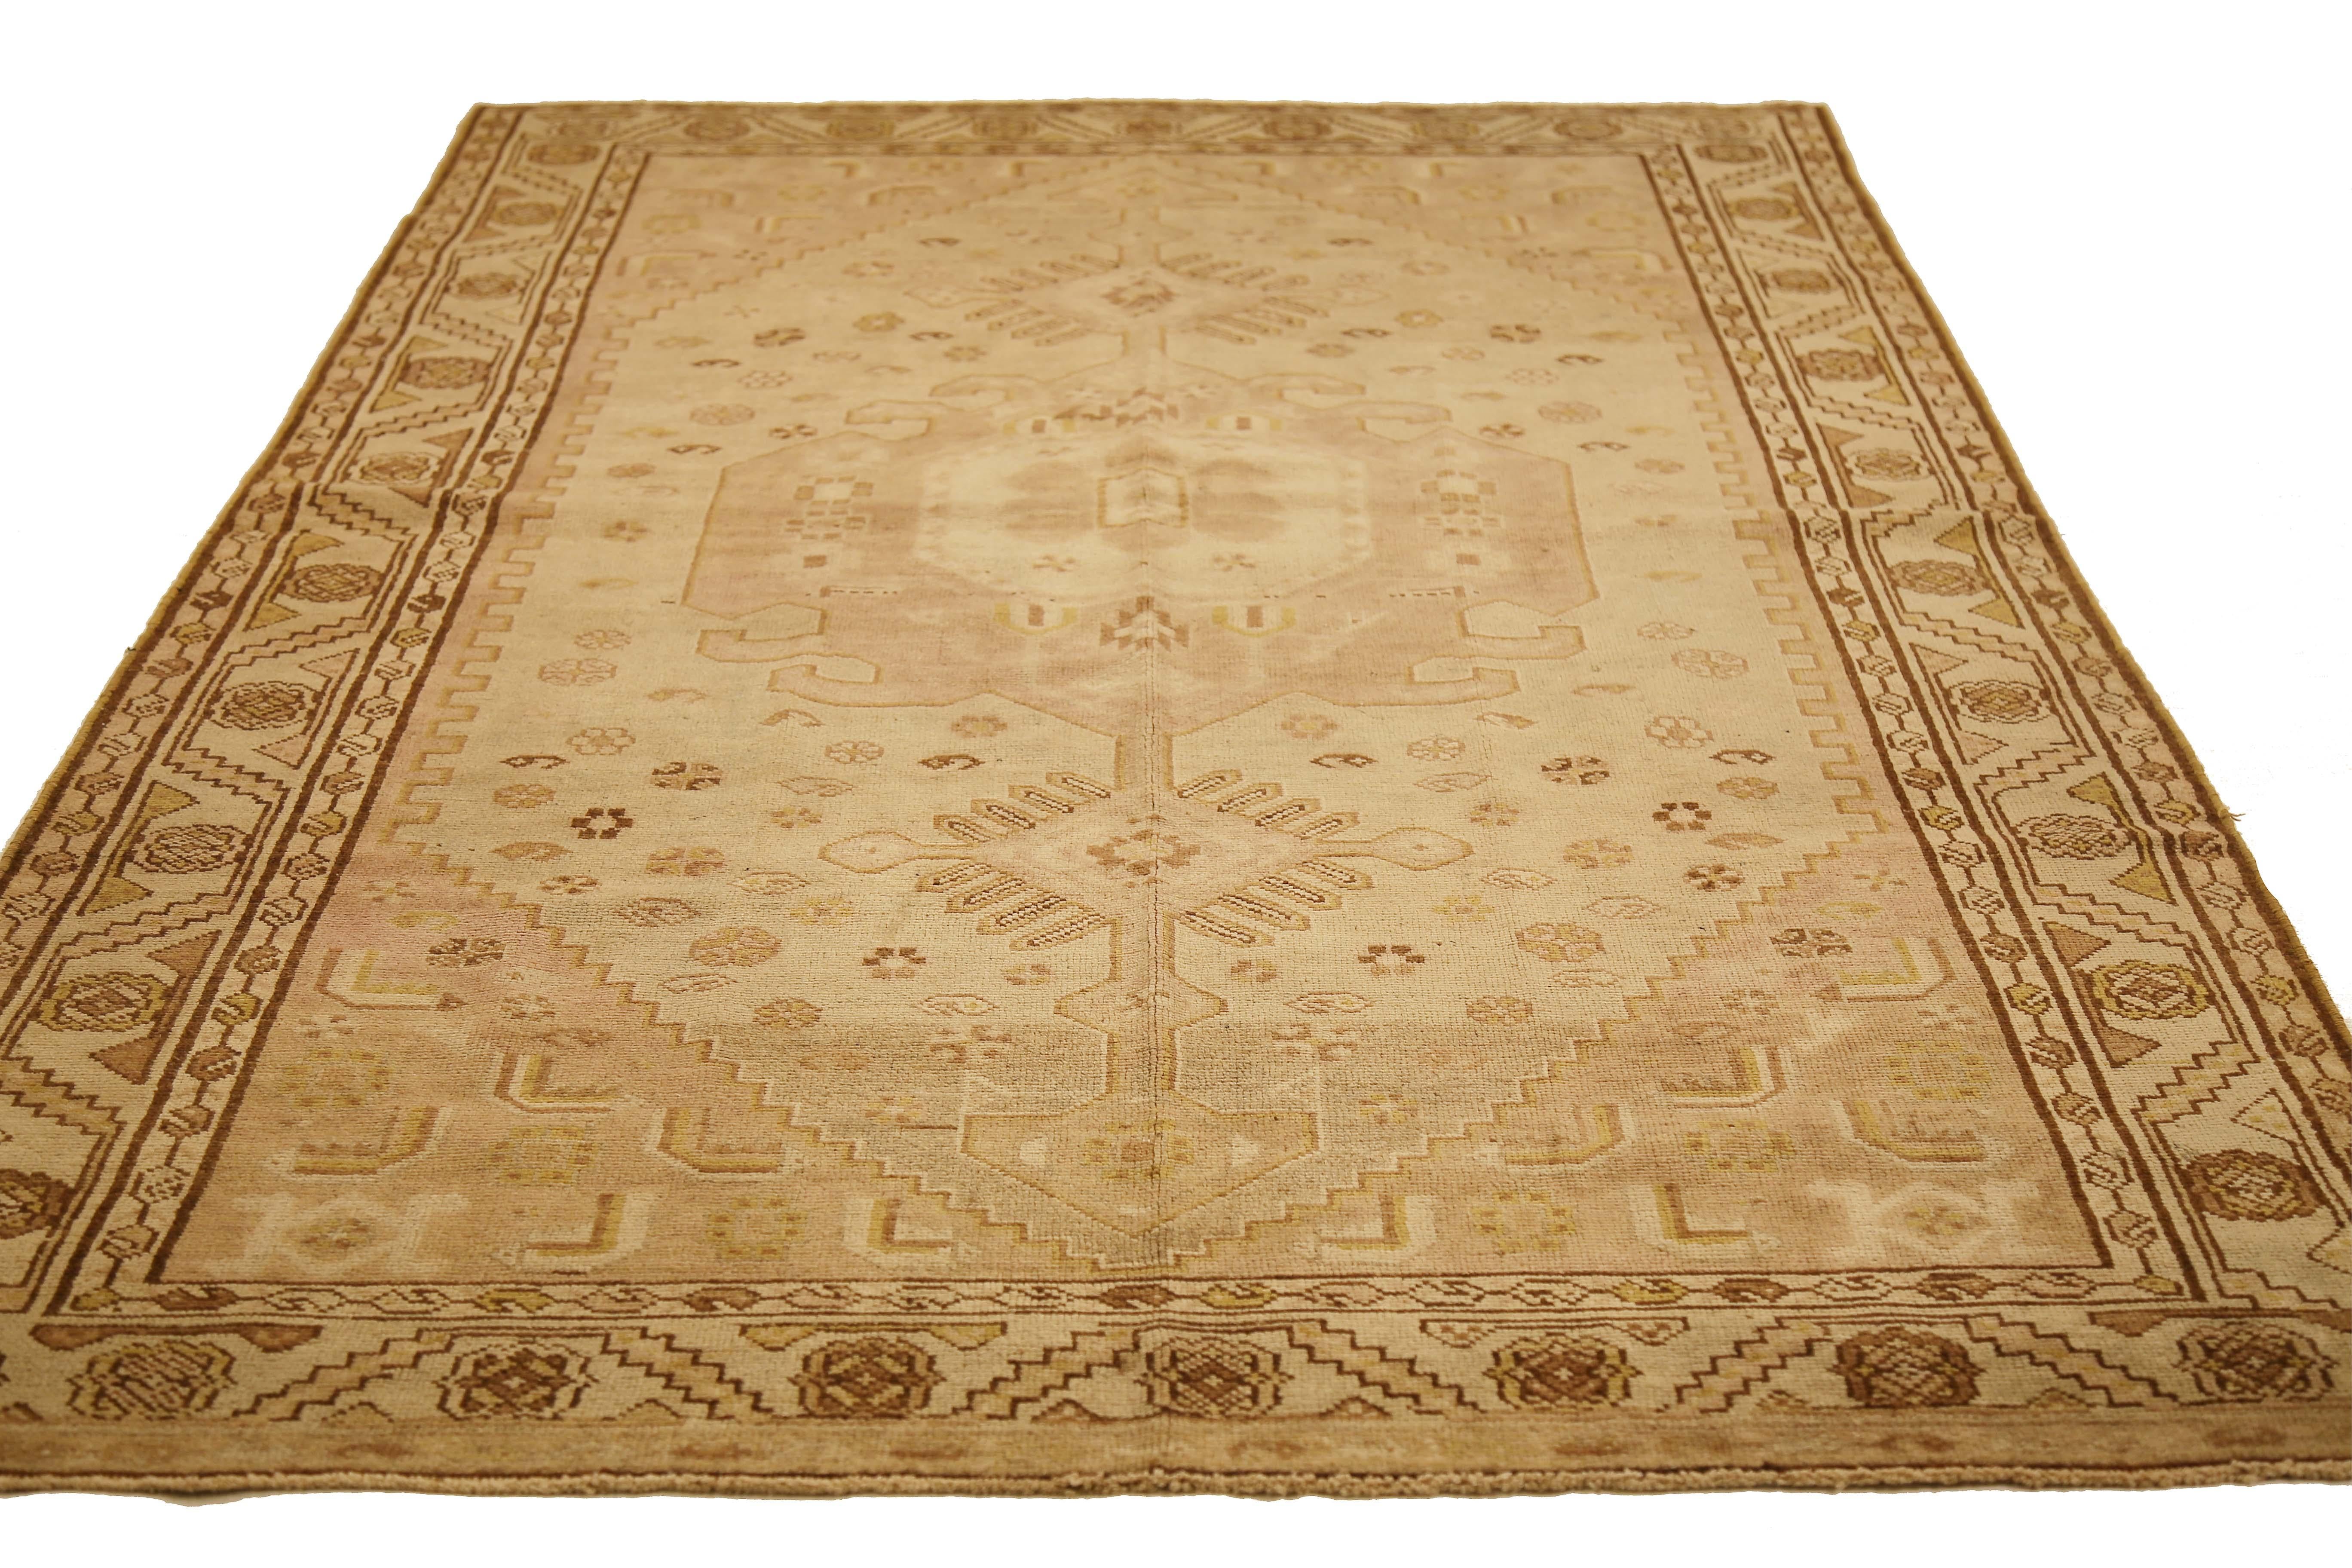 Antique Azerbaijan rug handwoven from the finest sheep’s wool and colored with all-natural vegetable dyes that are safe for humans and pets. It’s a traditional Azerbaijani design featuring mixed floral and geometric details over an ivory field. It